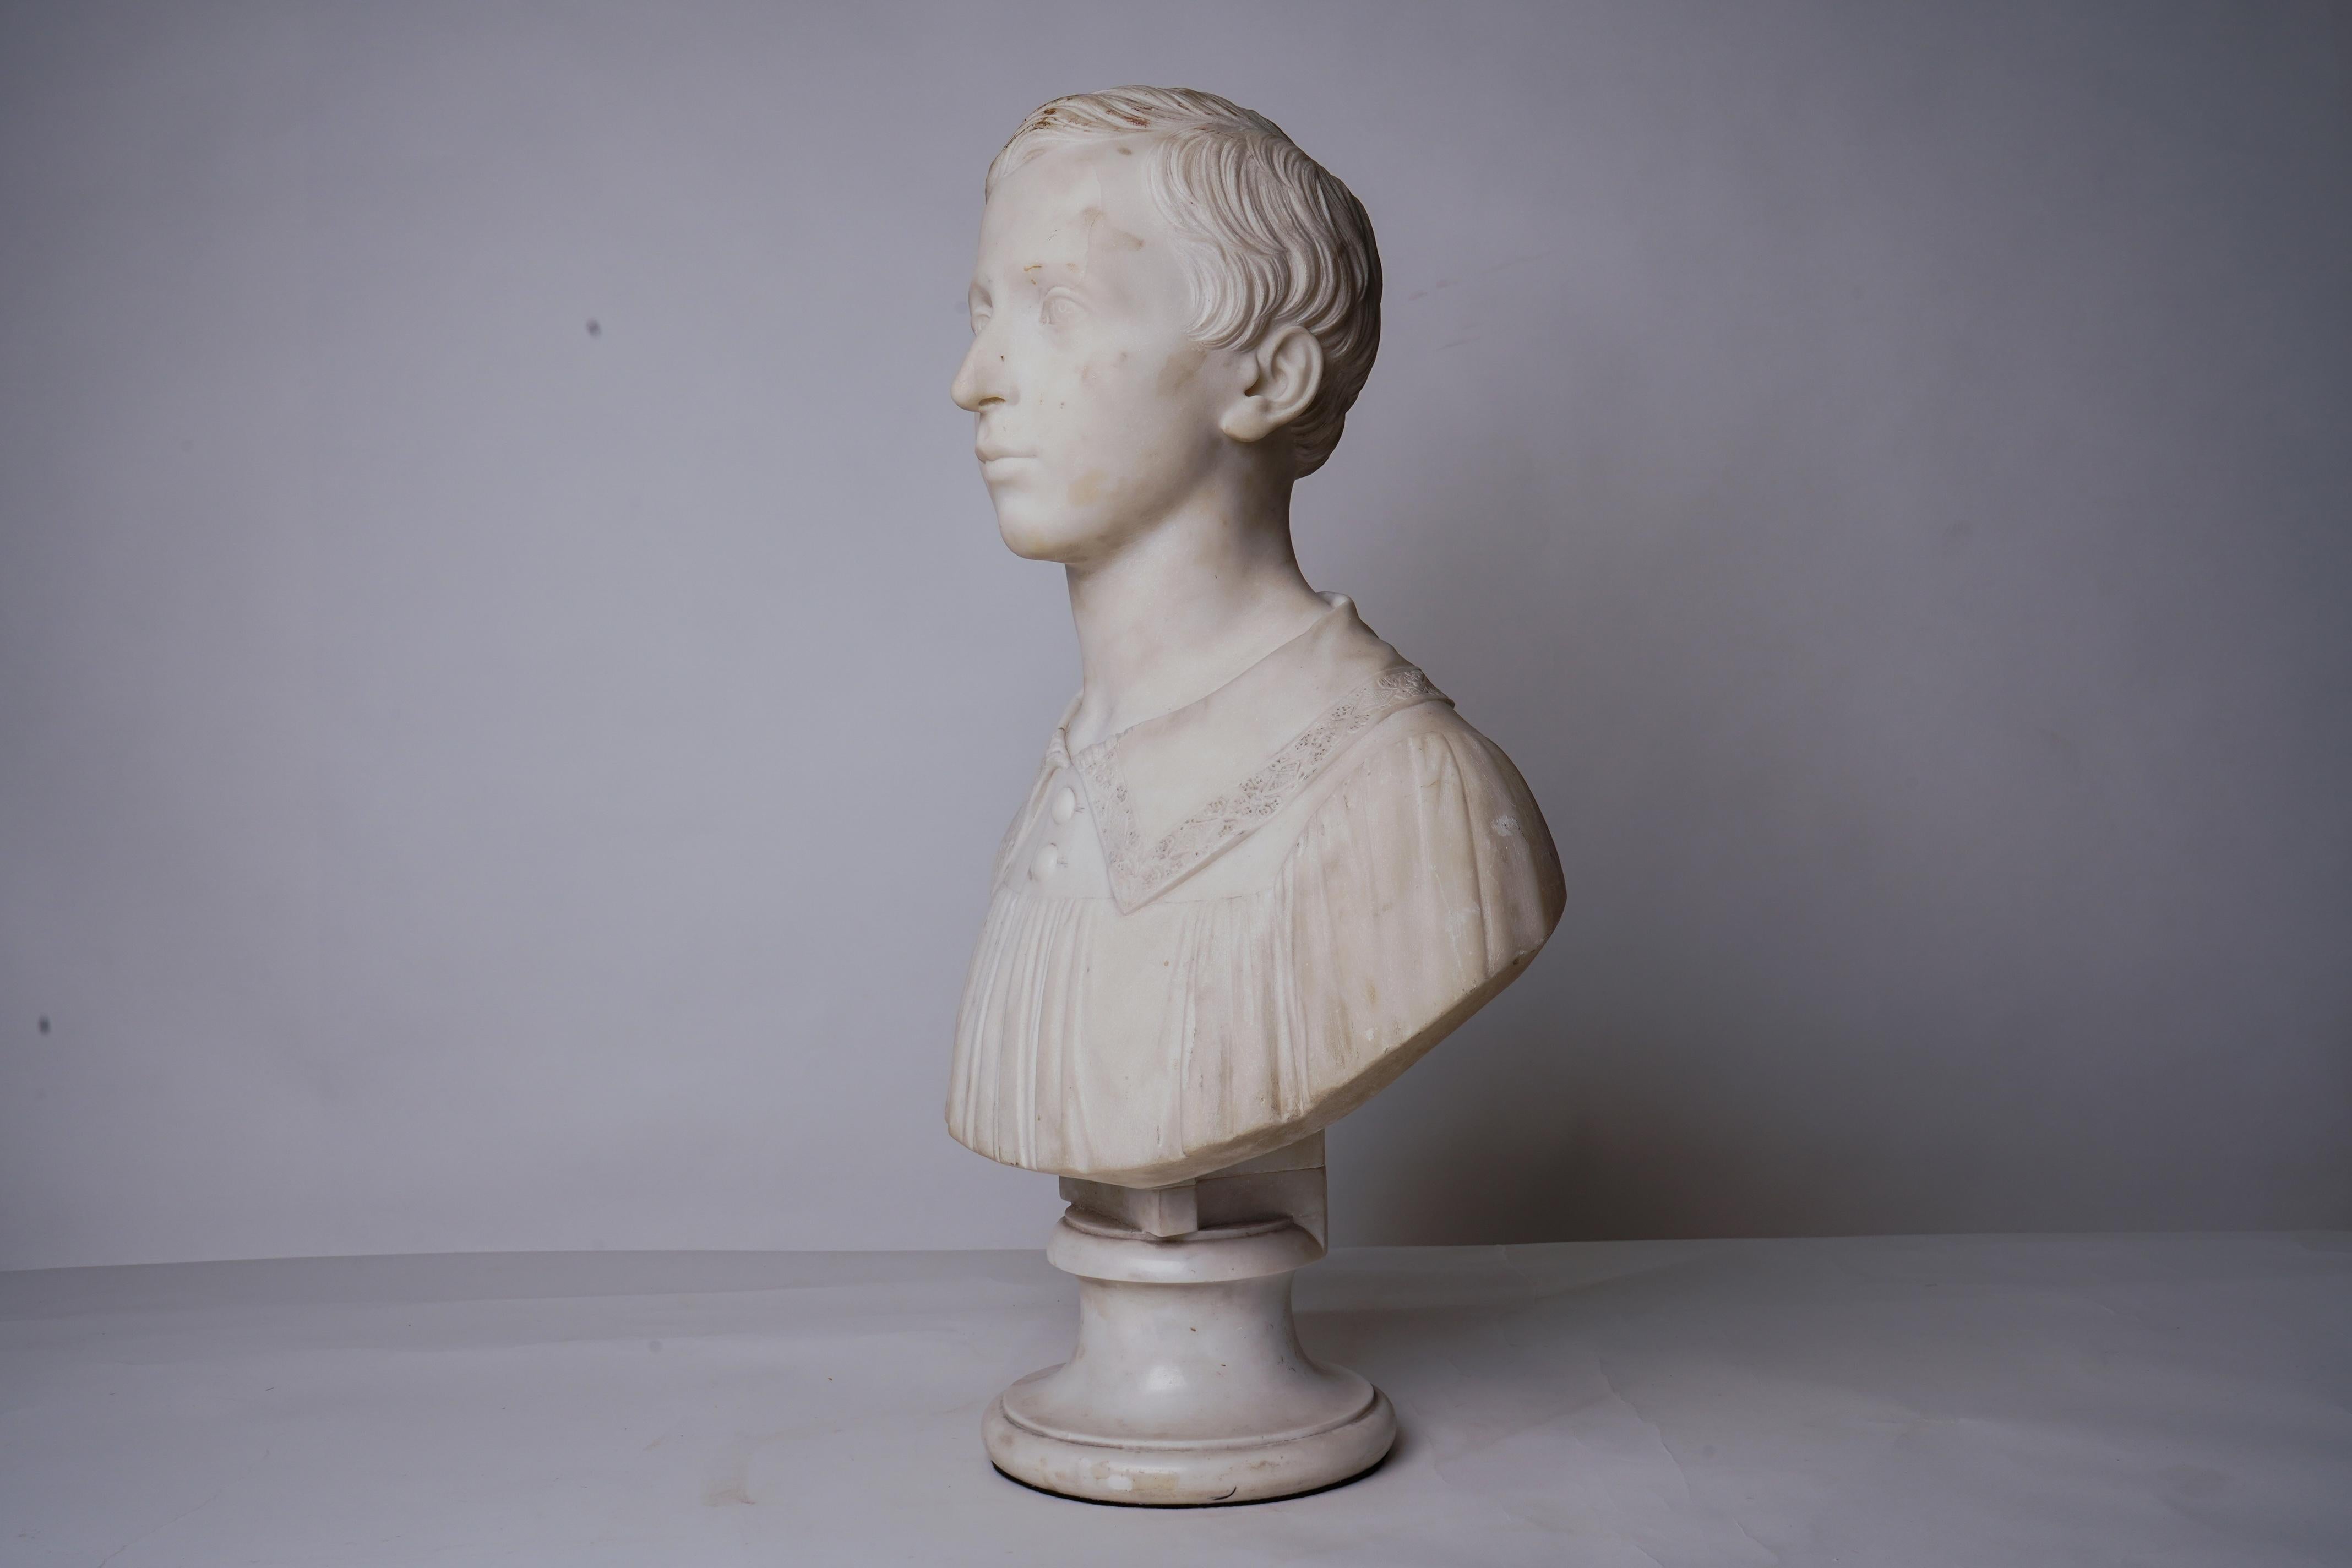 This bust depicts an adolescent, possibly at confirmation. The face is aristocratic and well-formed and damage is very limited. Although the marble does not appear to have been recently cleaned, it is relatively free of stains or discoloration.